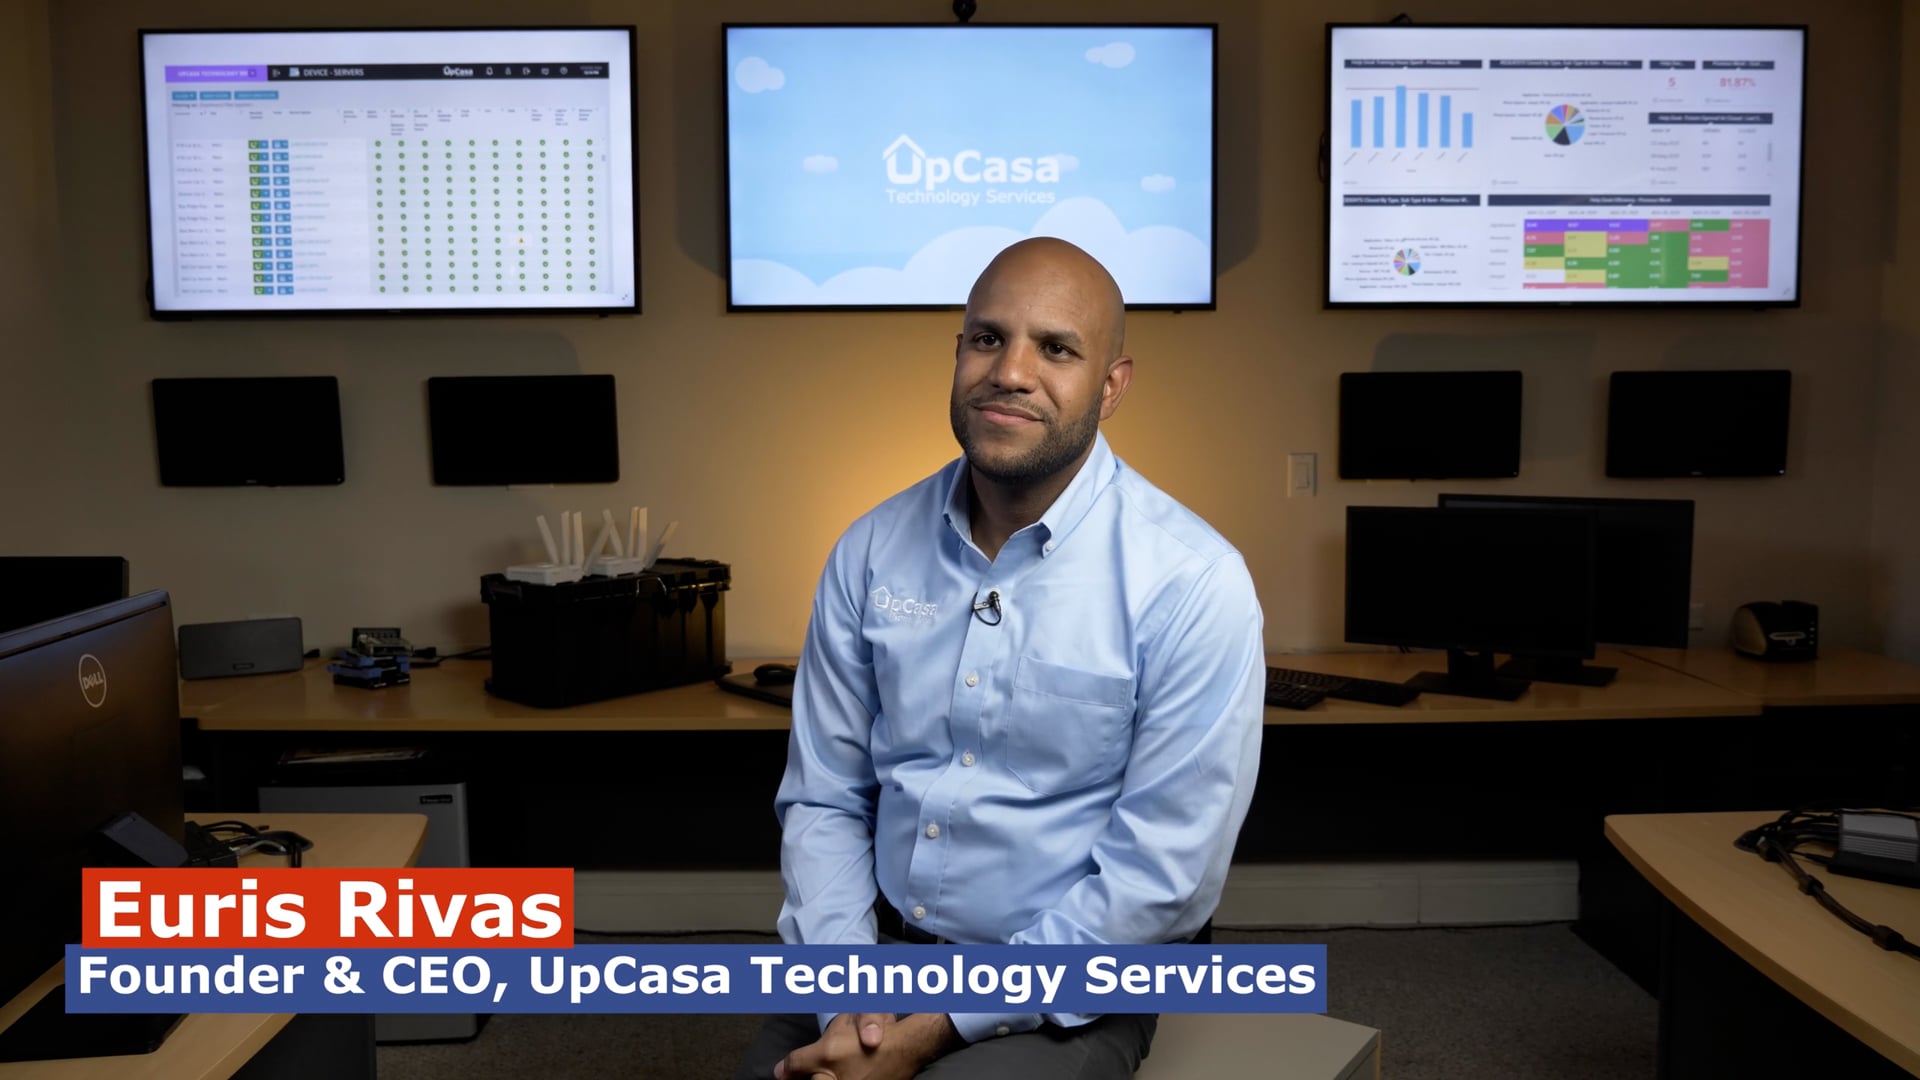 UpCasa Technology Services video business card.mp4